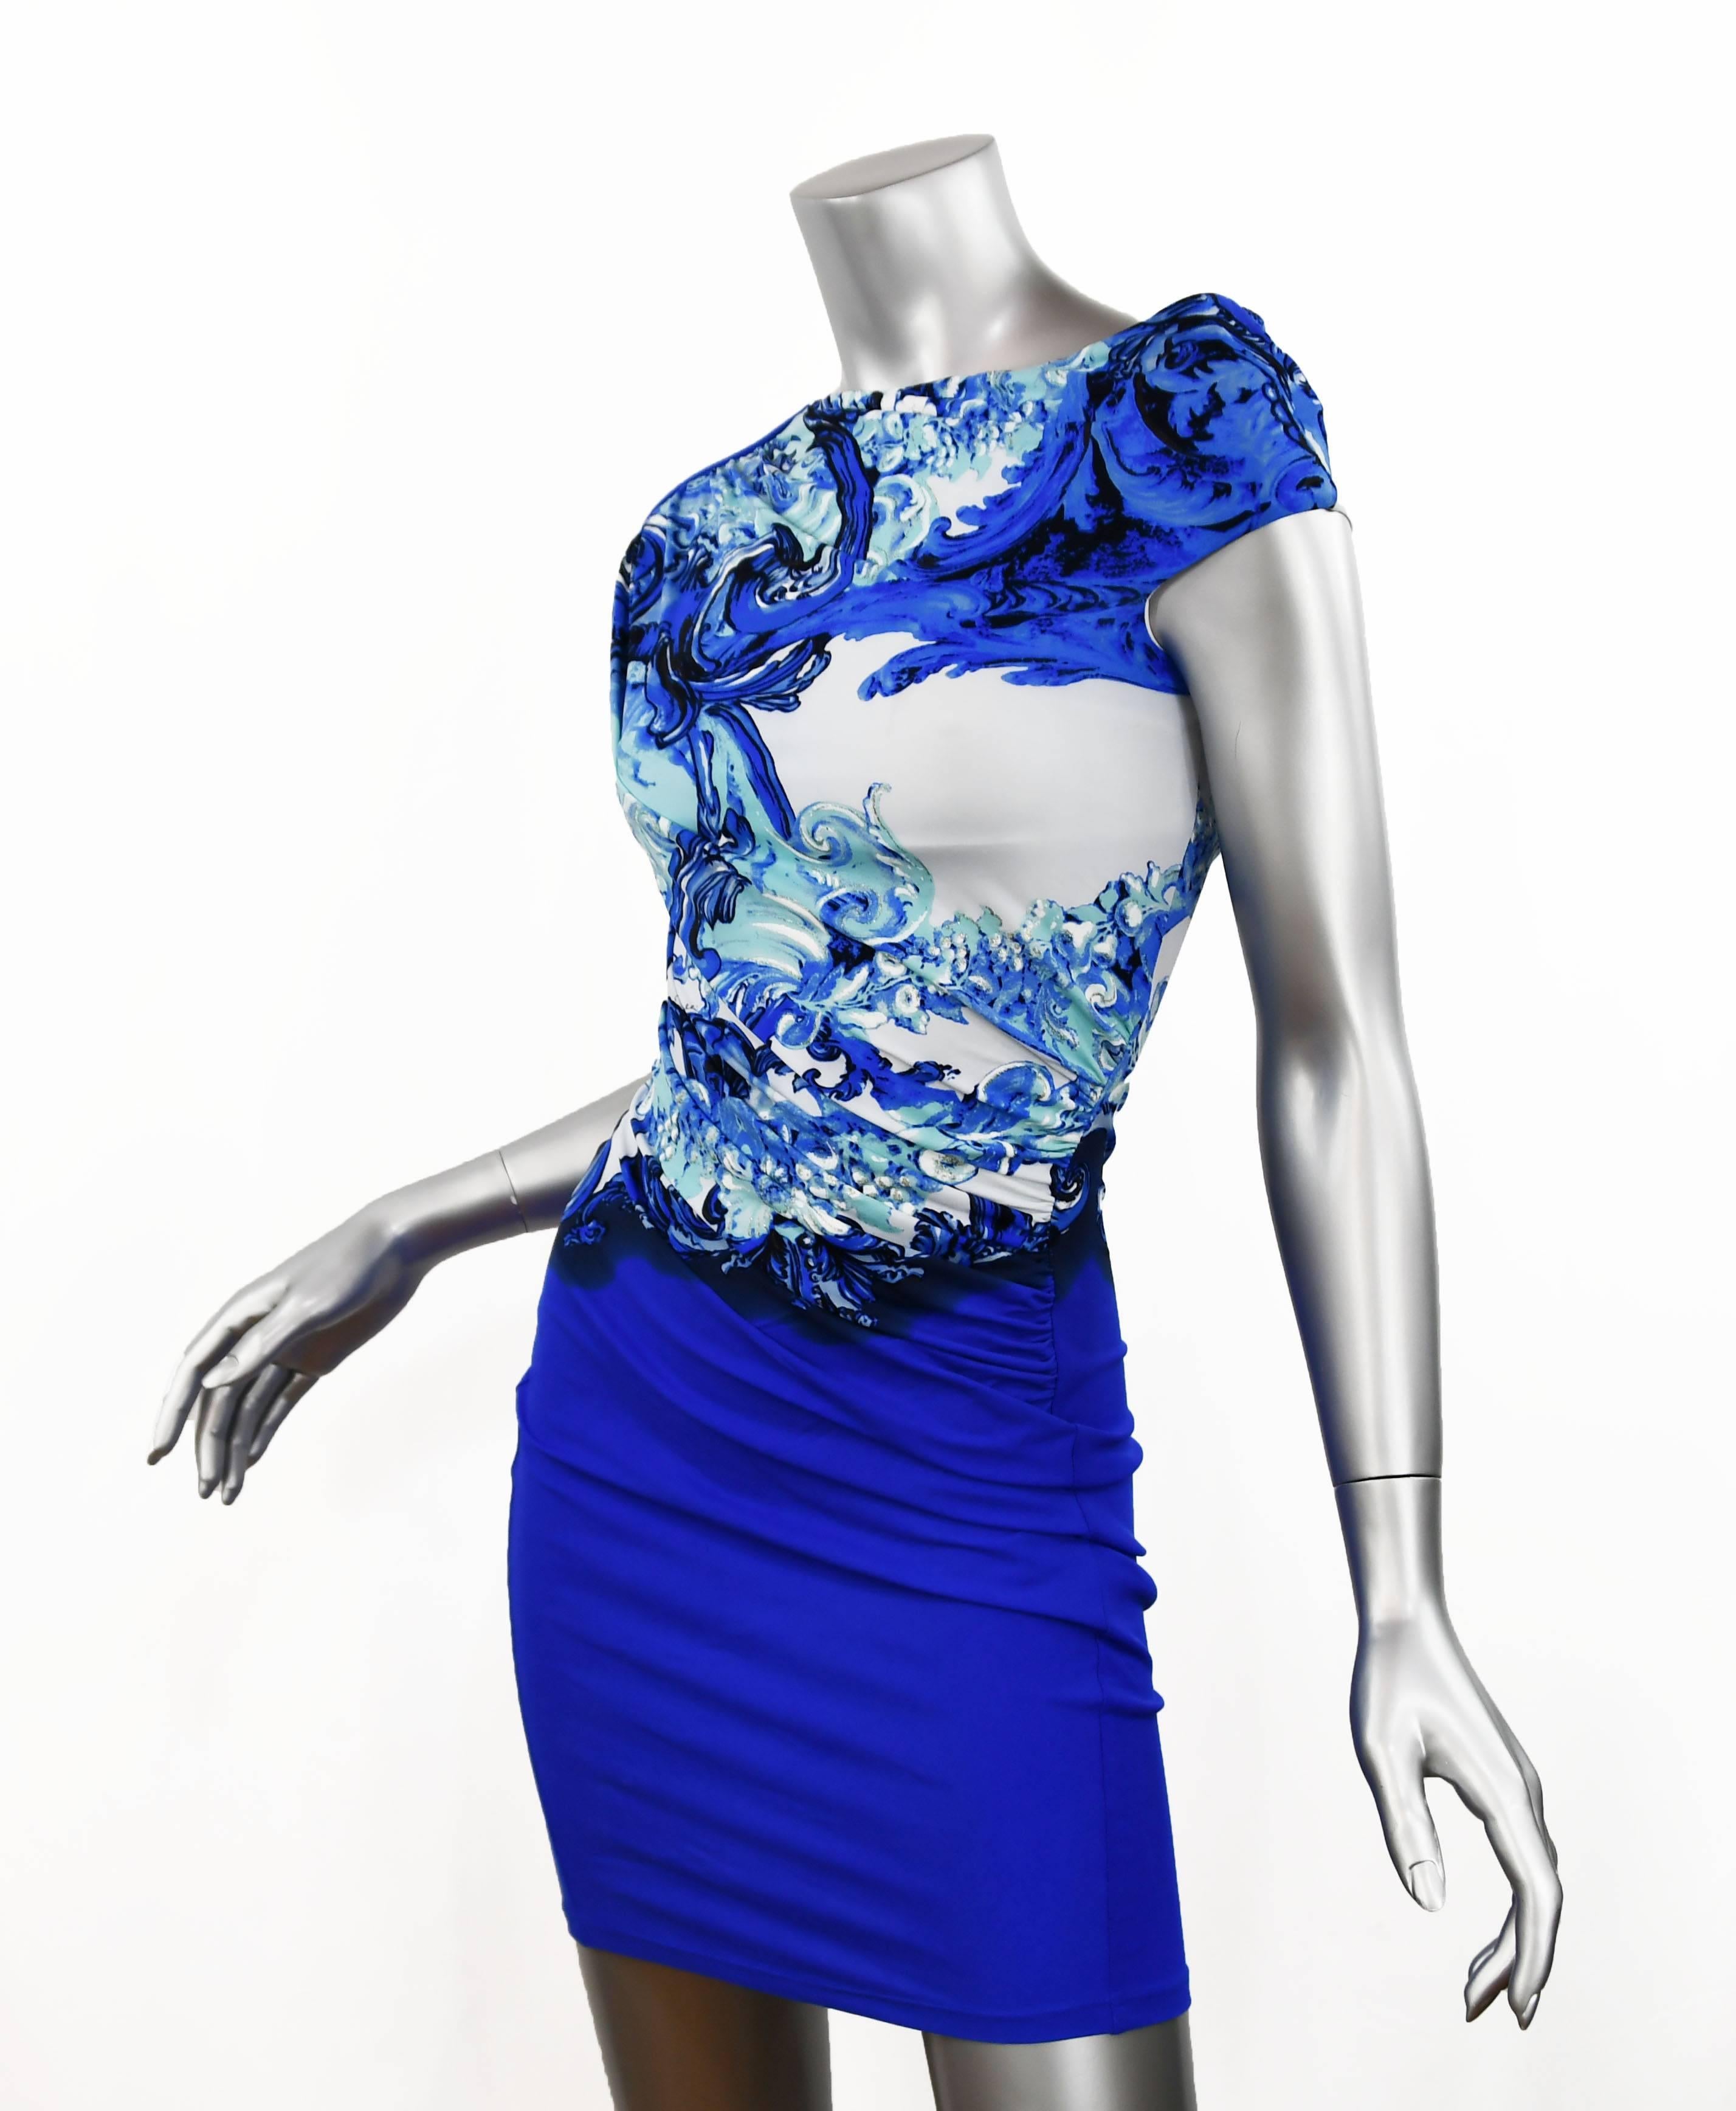 Roberto Cavalli Royal Blue (Bottom) with Mermaid/Sea Print sleeveless top (white/blue/silver/turquoise) in one piece.  Very flattering for the figure.  Easy summer and resort wear.  Size 40 